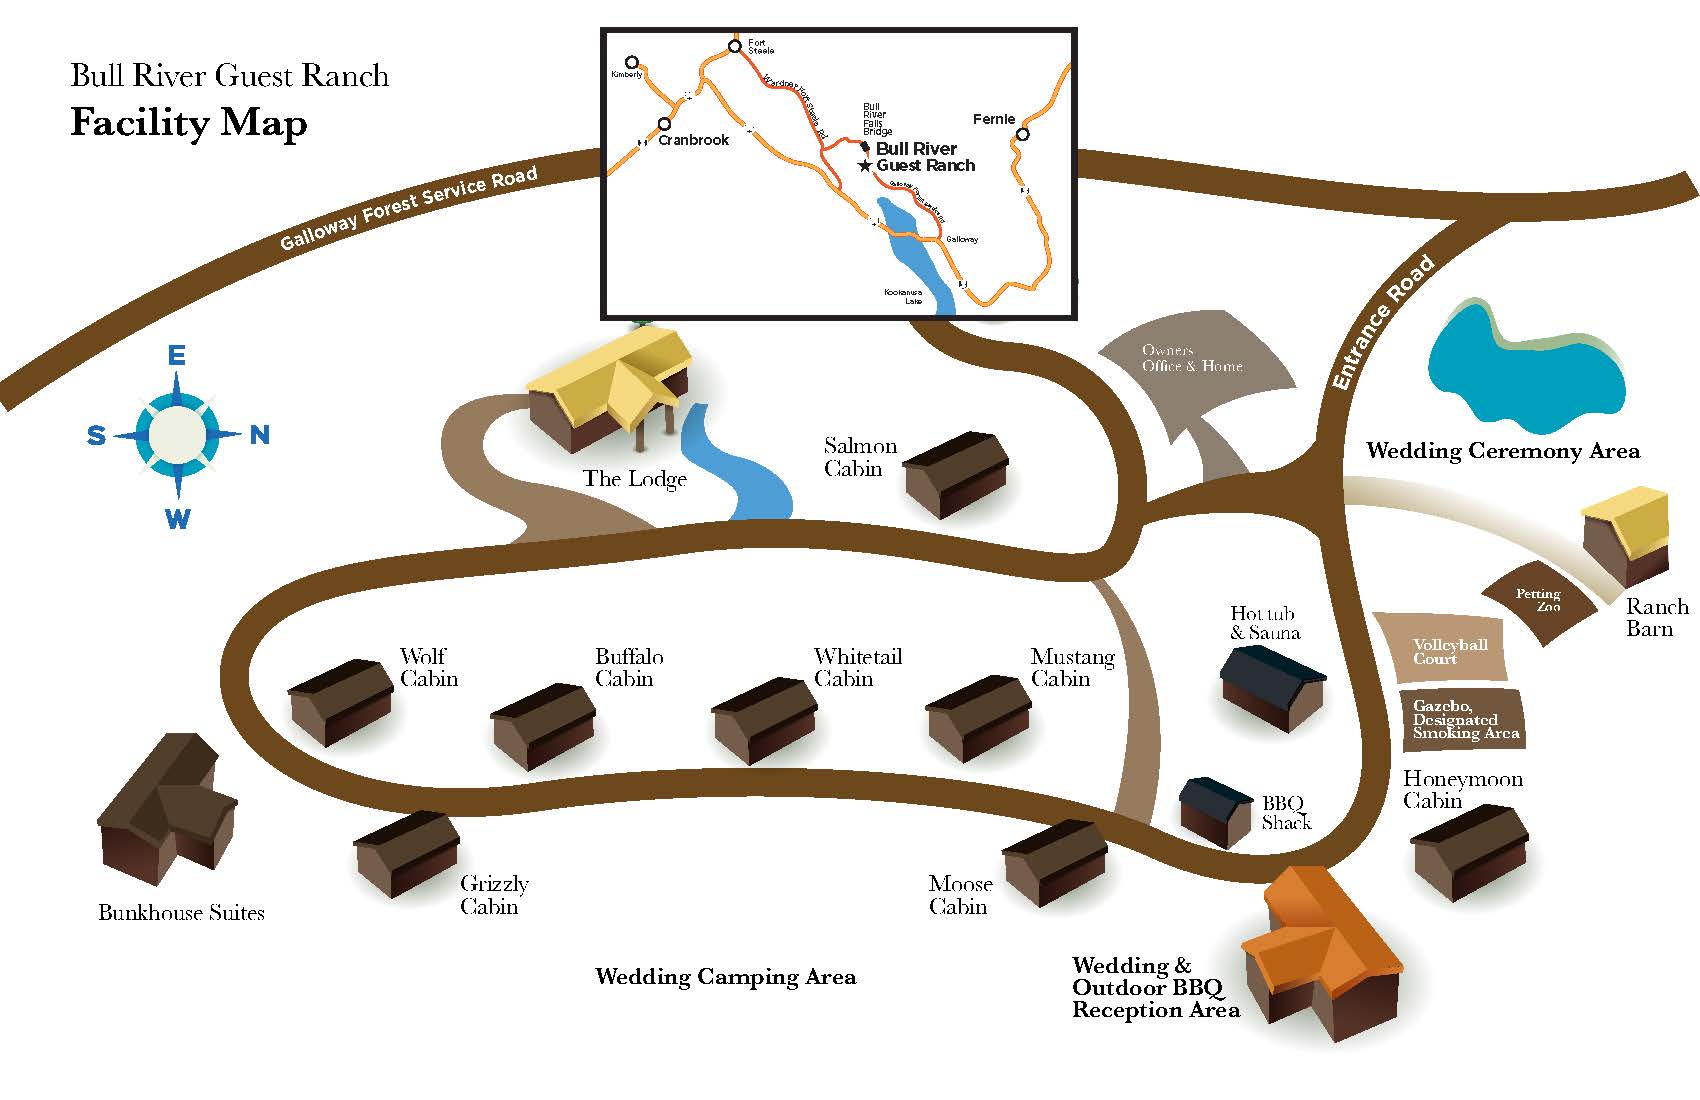 Bull River Guest Ranch Facility Map